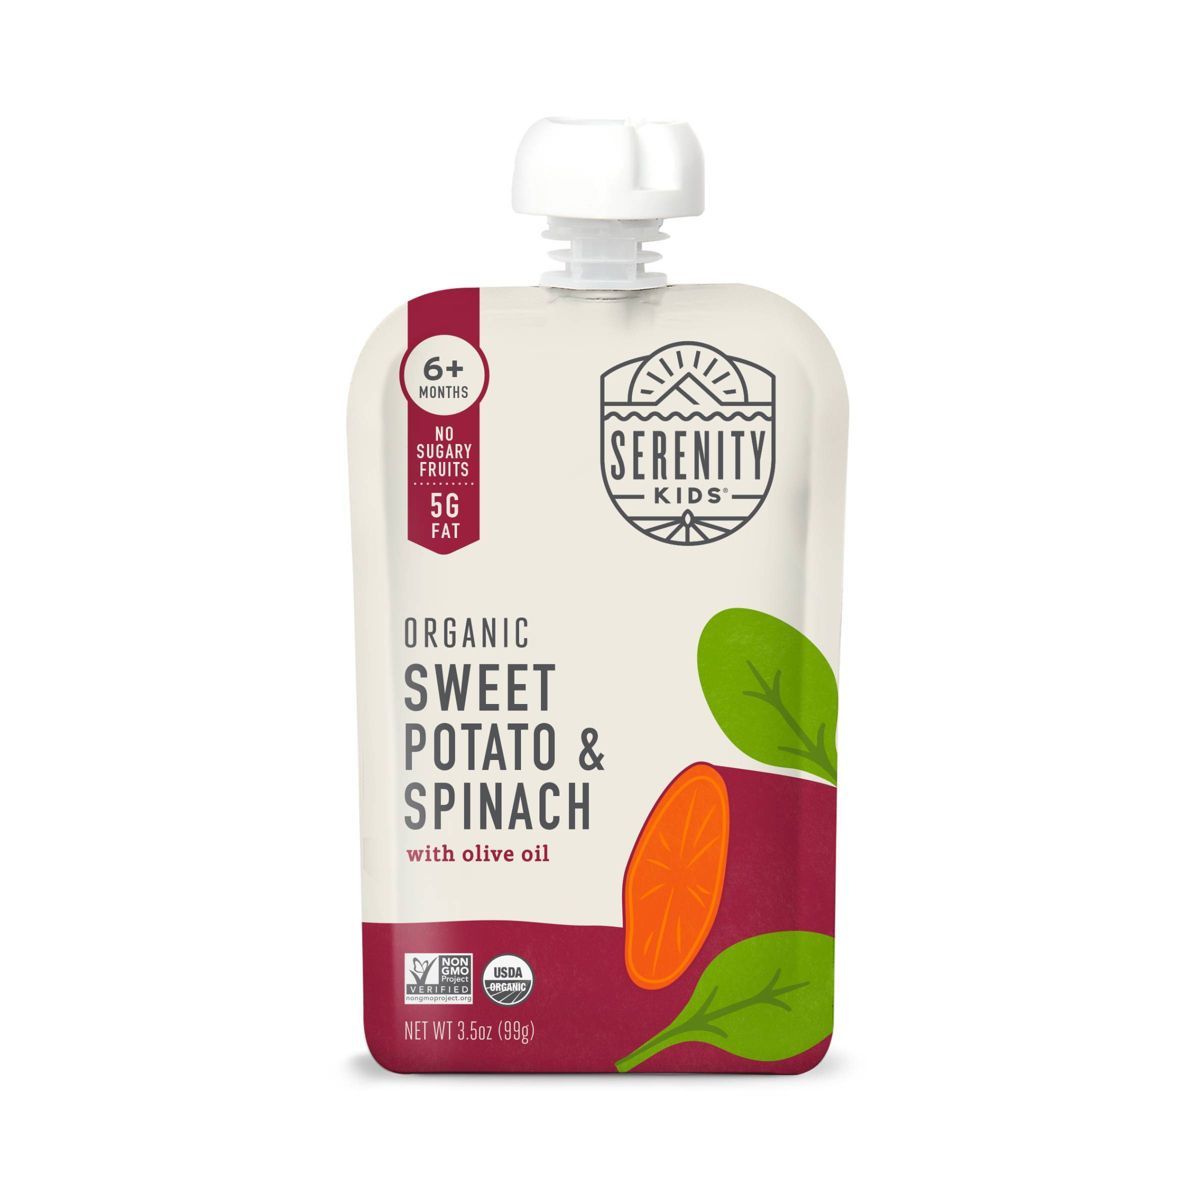 Serenity Kids Organic Sweet Potato and Spinach with Olive Oil Baby Meals - 3.5oz | Target